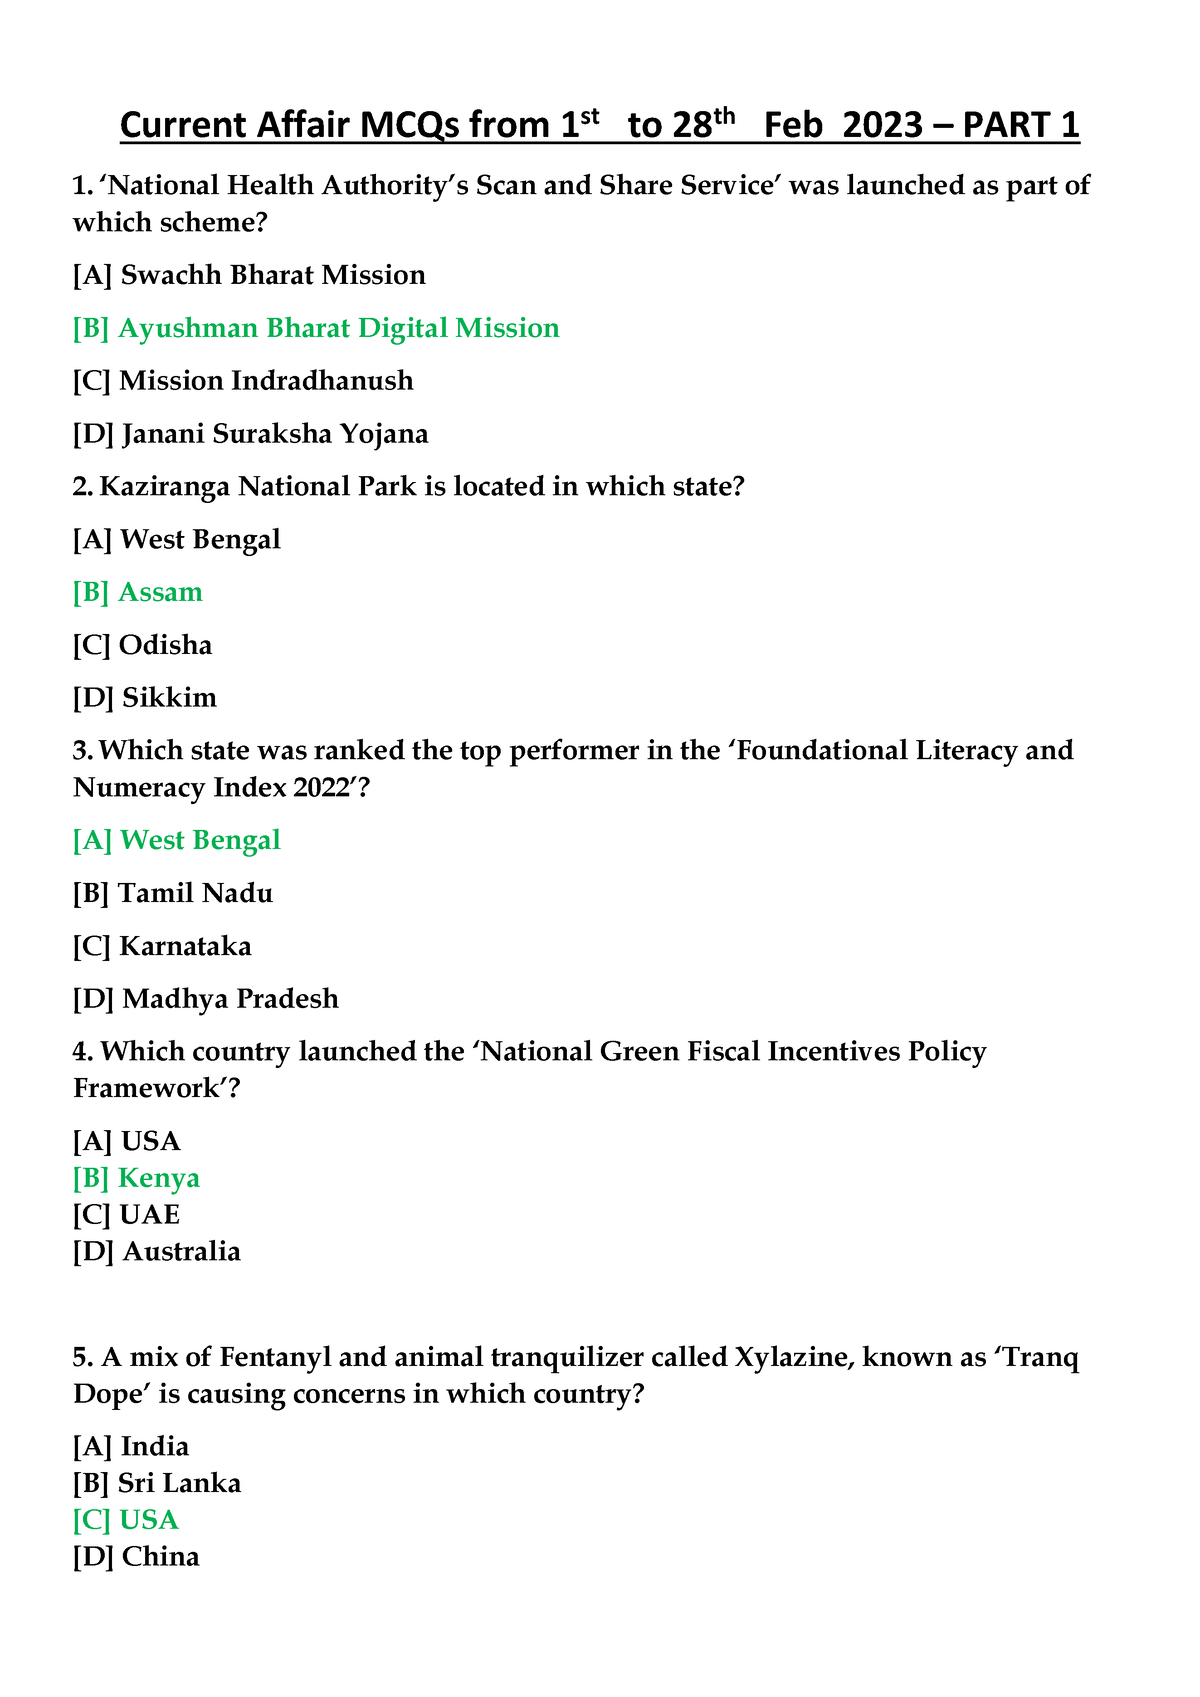 Current Affairs Mcqs 1st To 28th Feb 23 Part 1 Current Affair Mcqs From 1st To 28th Feb 0948